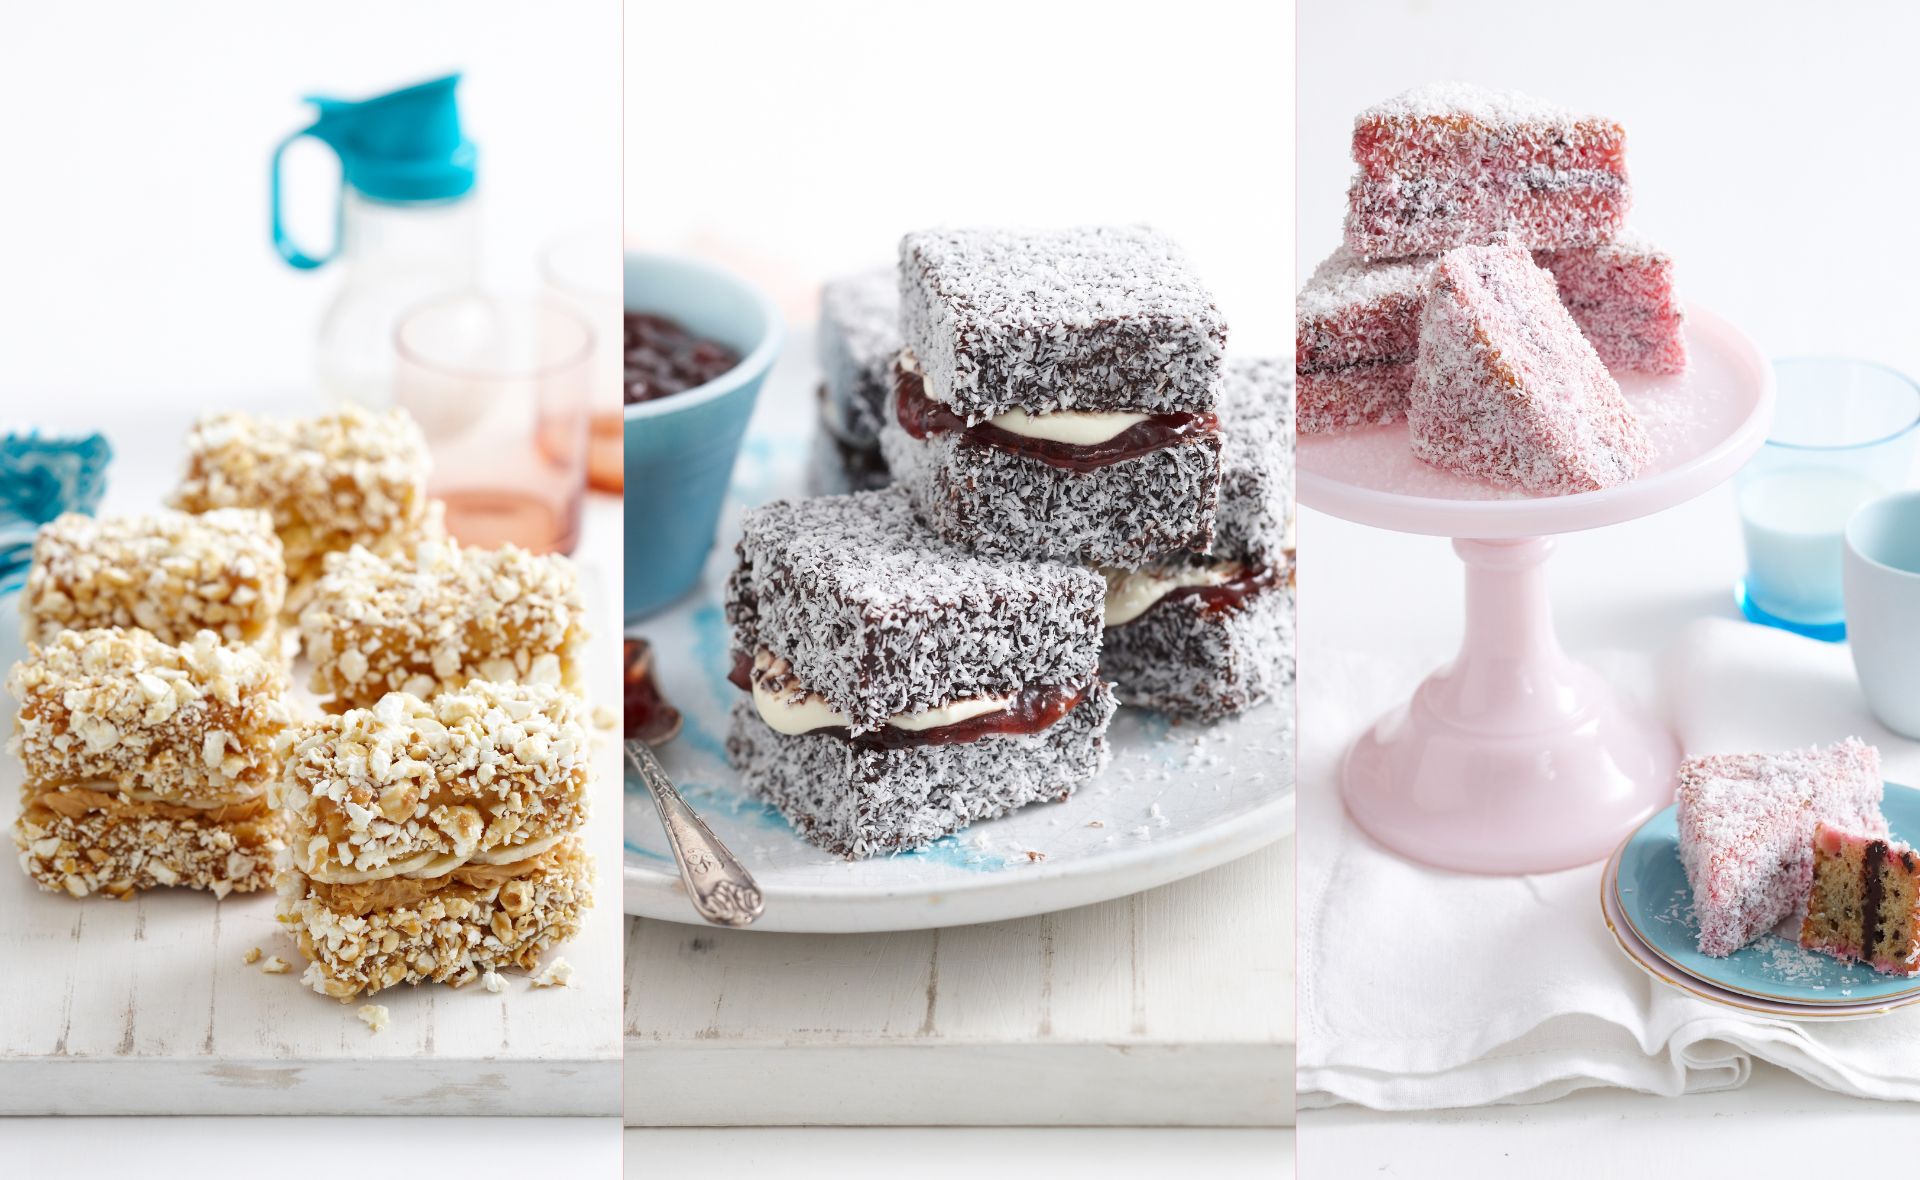 The best lamington recipes you need to try!